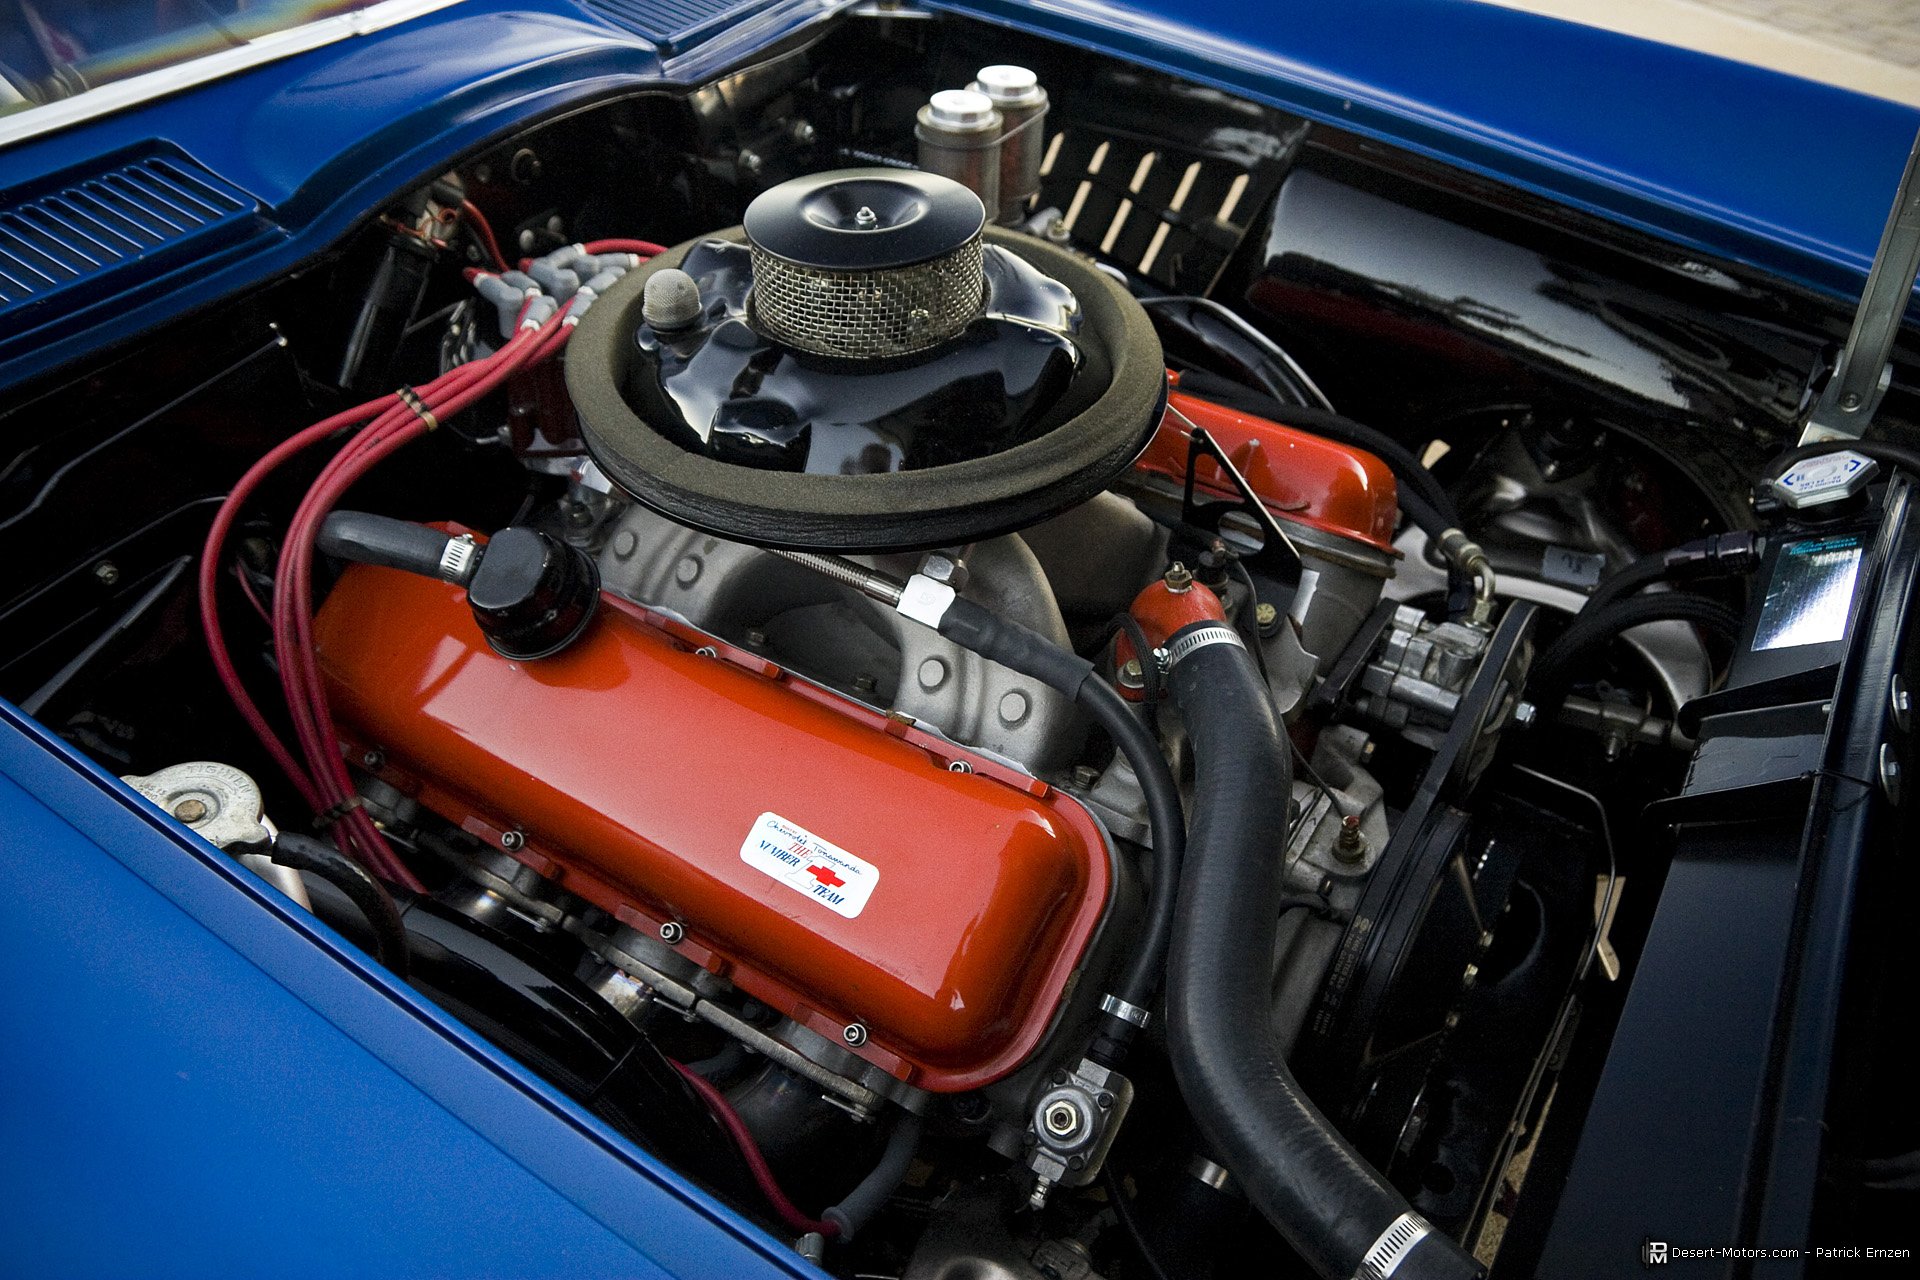 1967, Chevrolet, Corvette, 427, 435hp, Tri power, Coupe, Pickett, Race, Racing, Hot, Rod, Rods, Muscle, Supercar, Classic Wallpaper